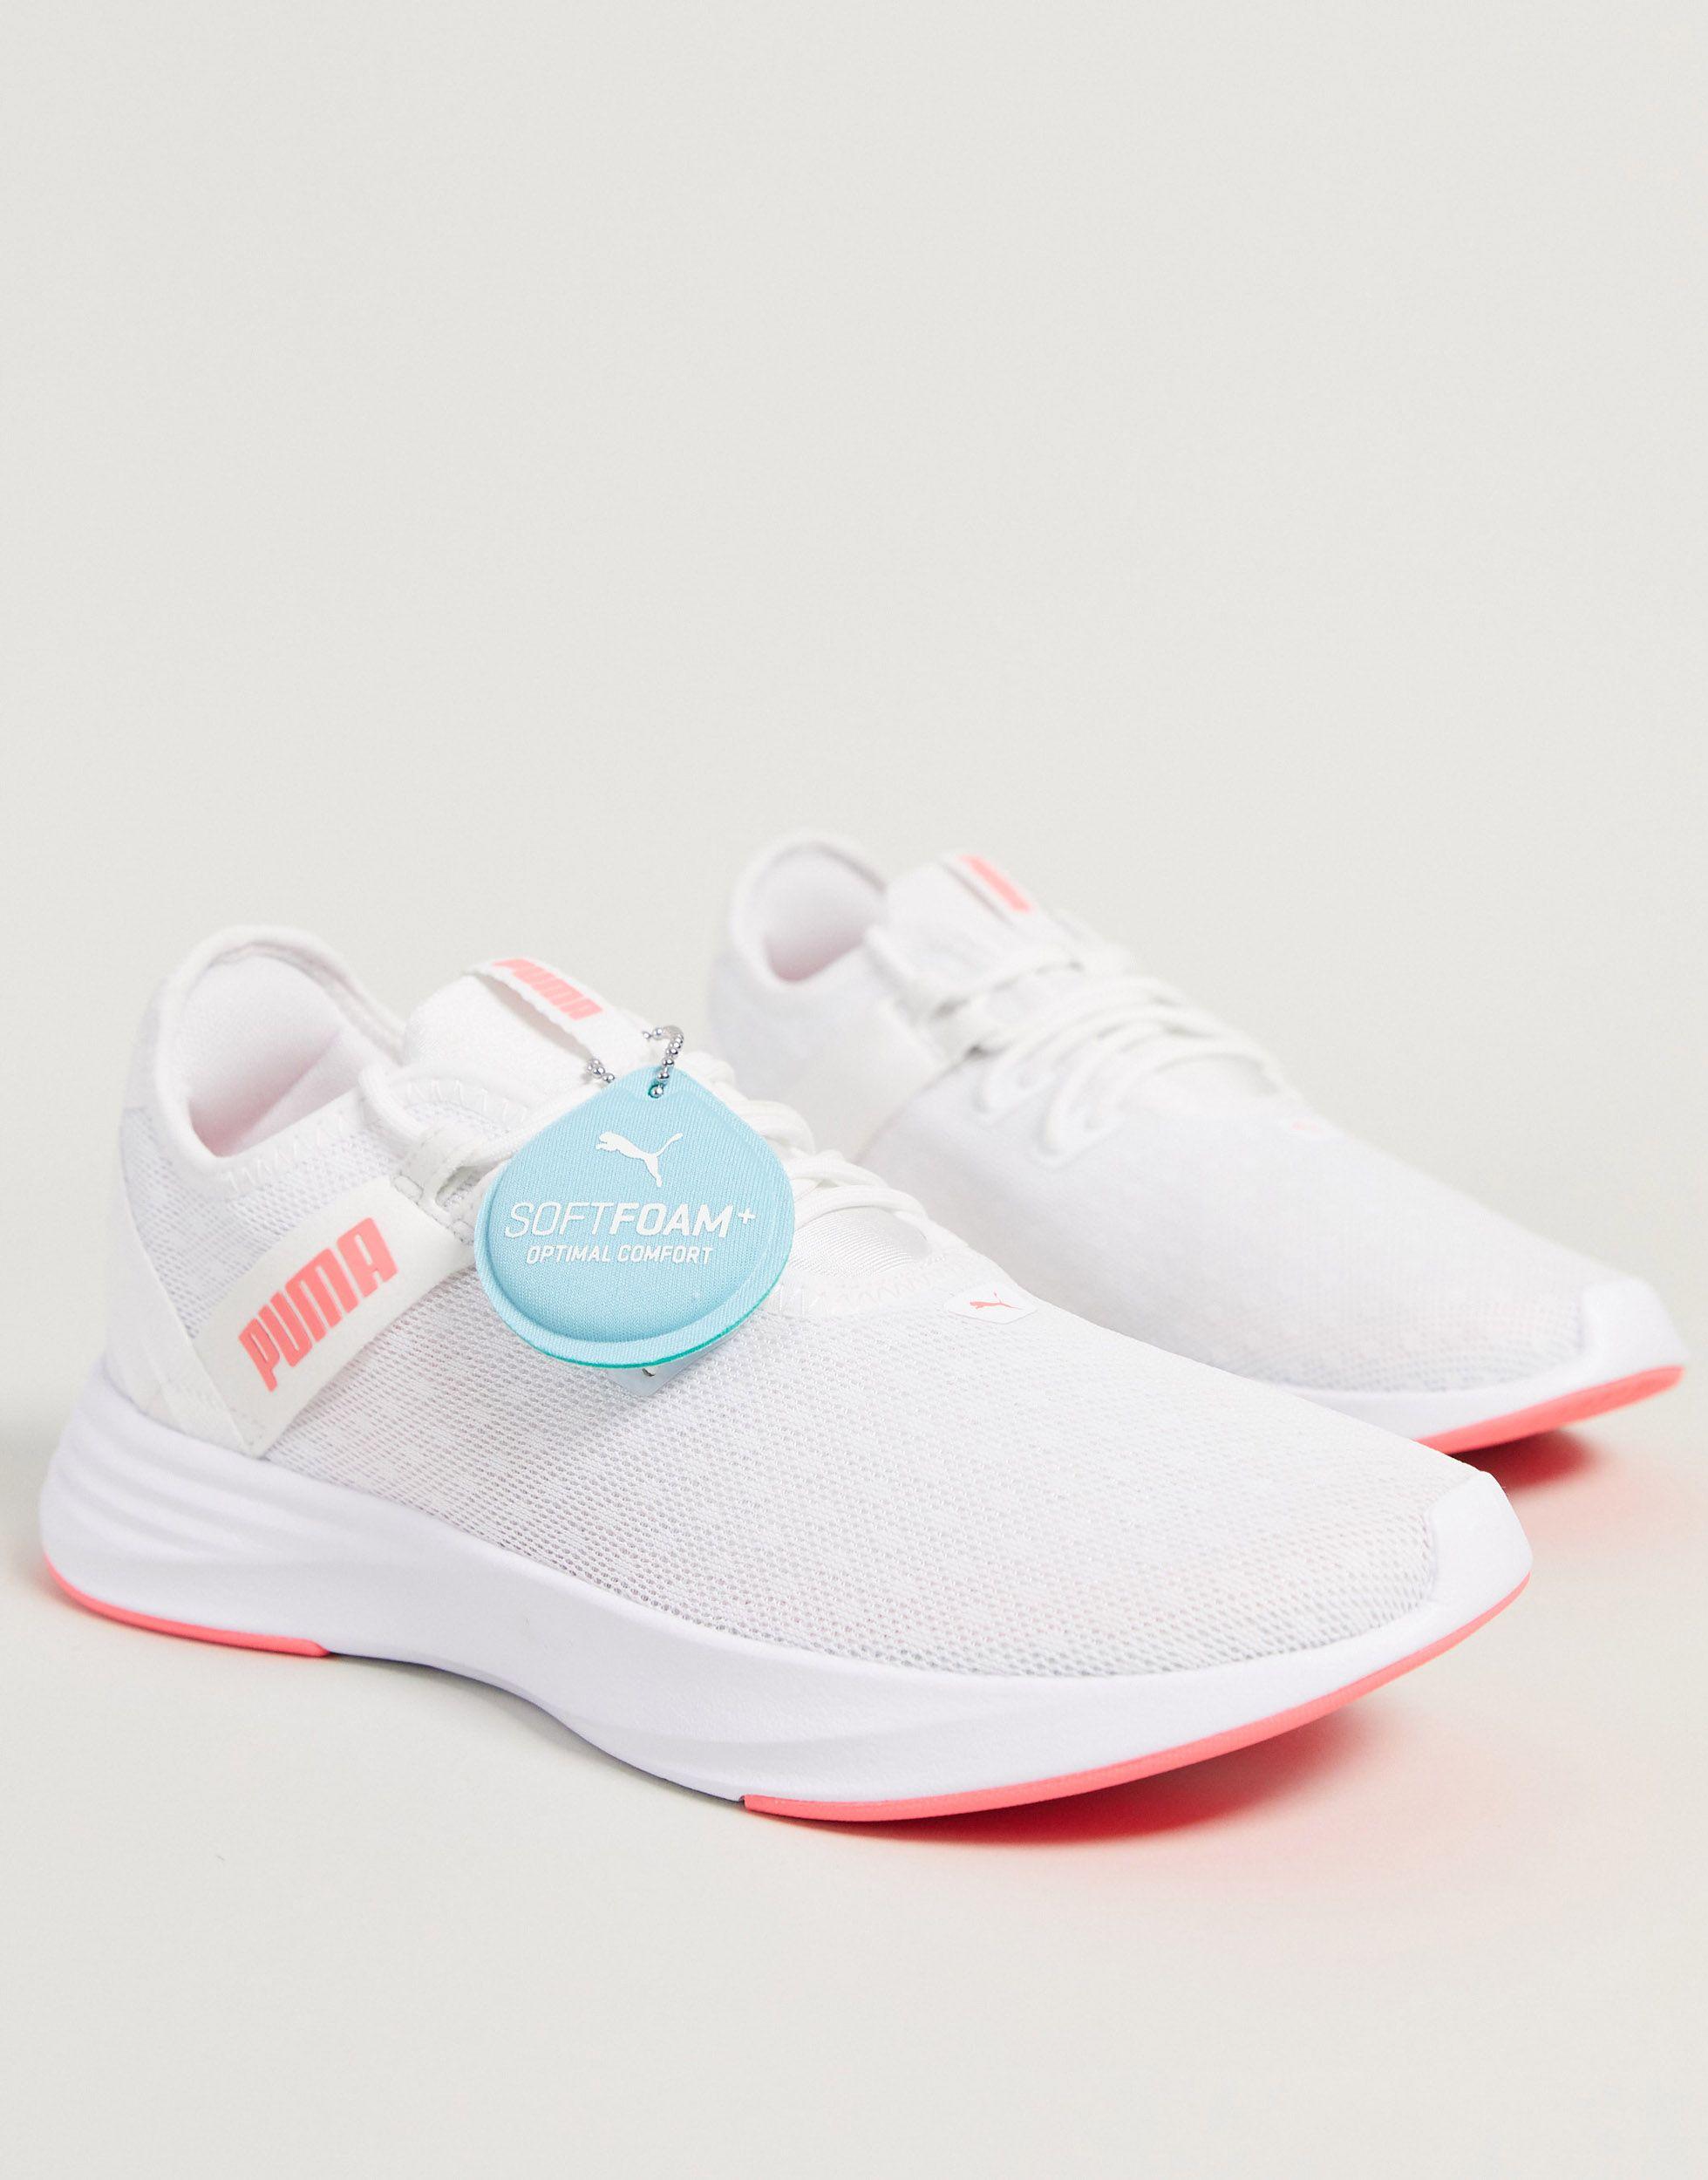 PUMA Rubber Radiate Xt Pattern Wn's Indoor Sneakers in White - Save 79% |  Lyst